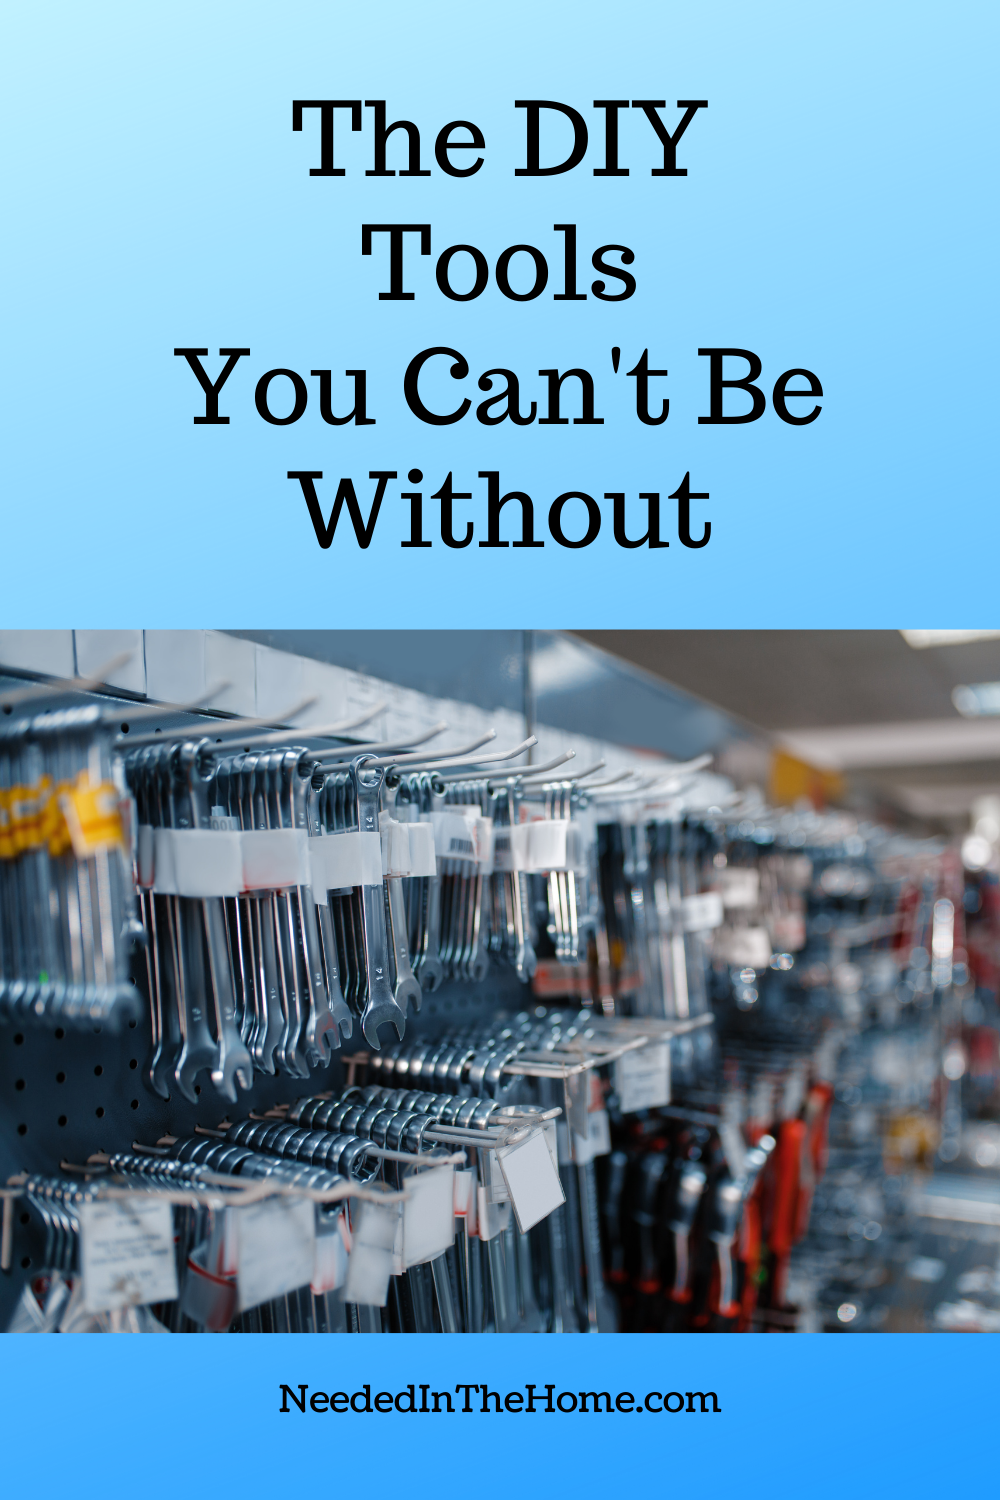 pinterest-pin-description the diy tools you can't be without tool aisle in hardware store neededinthehome